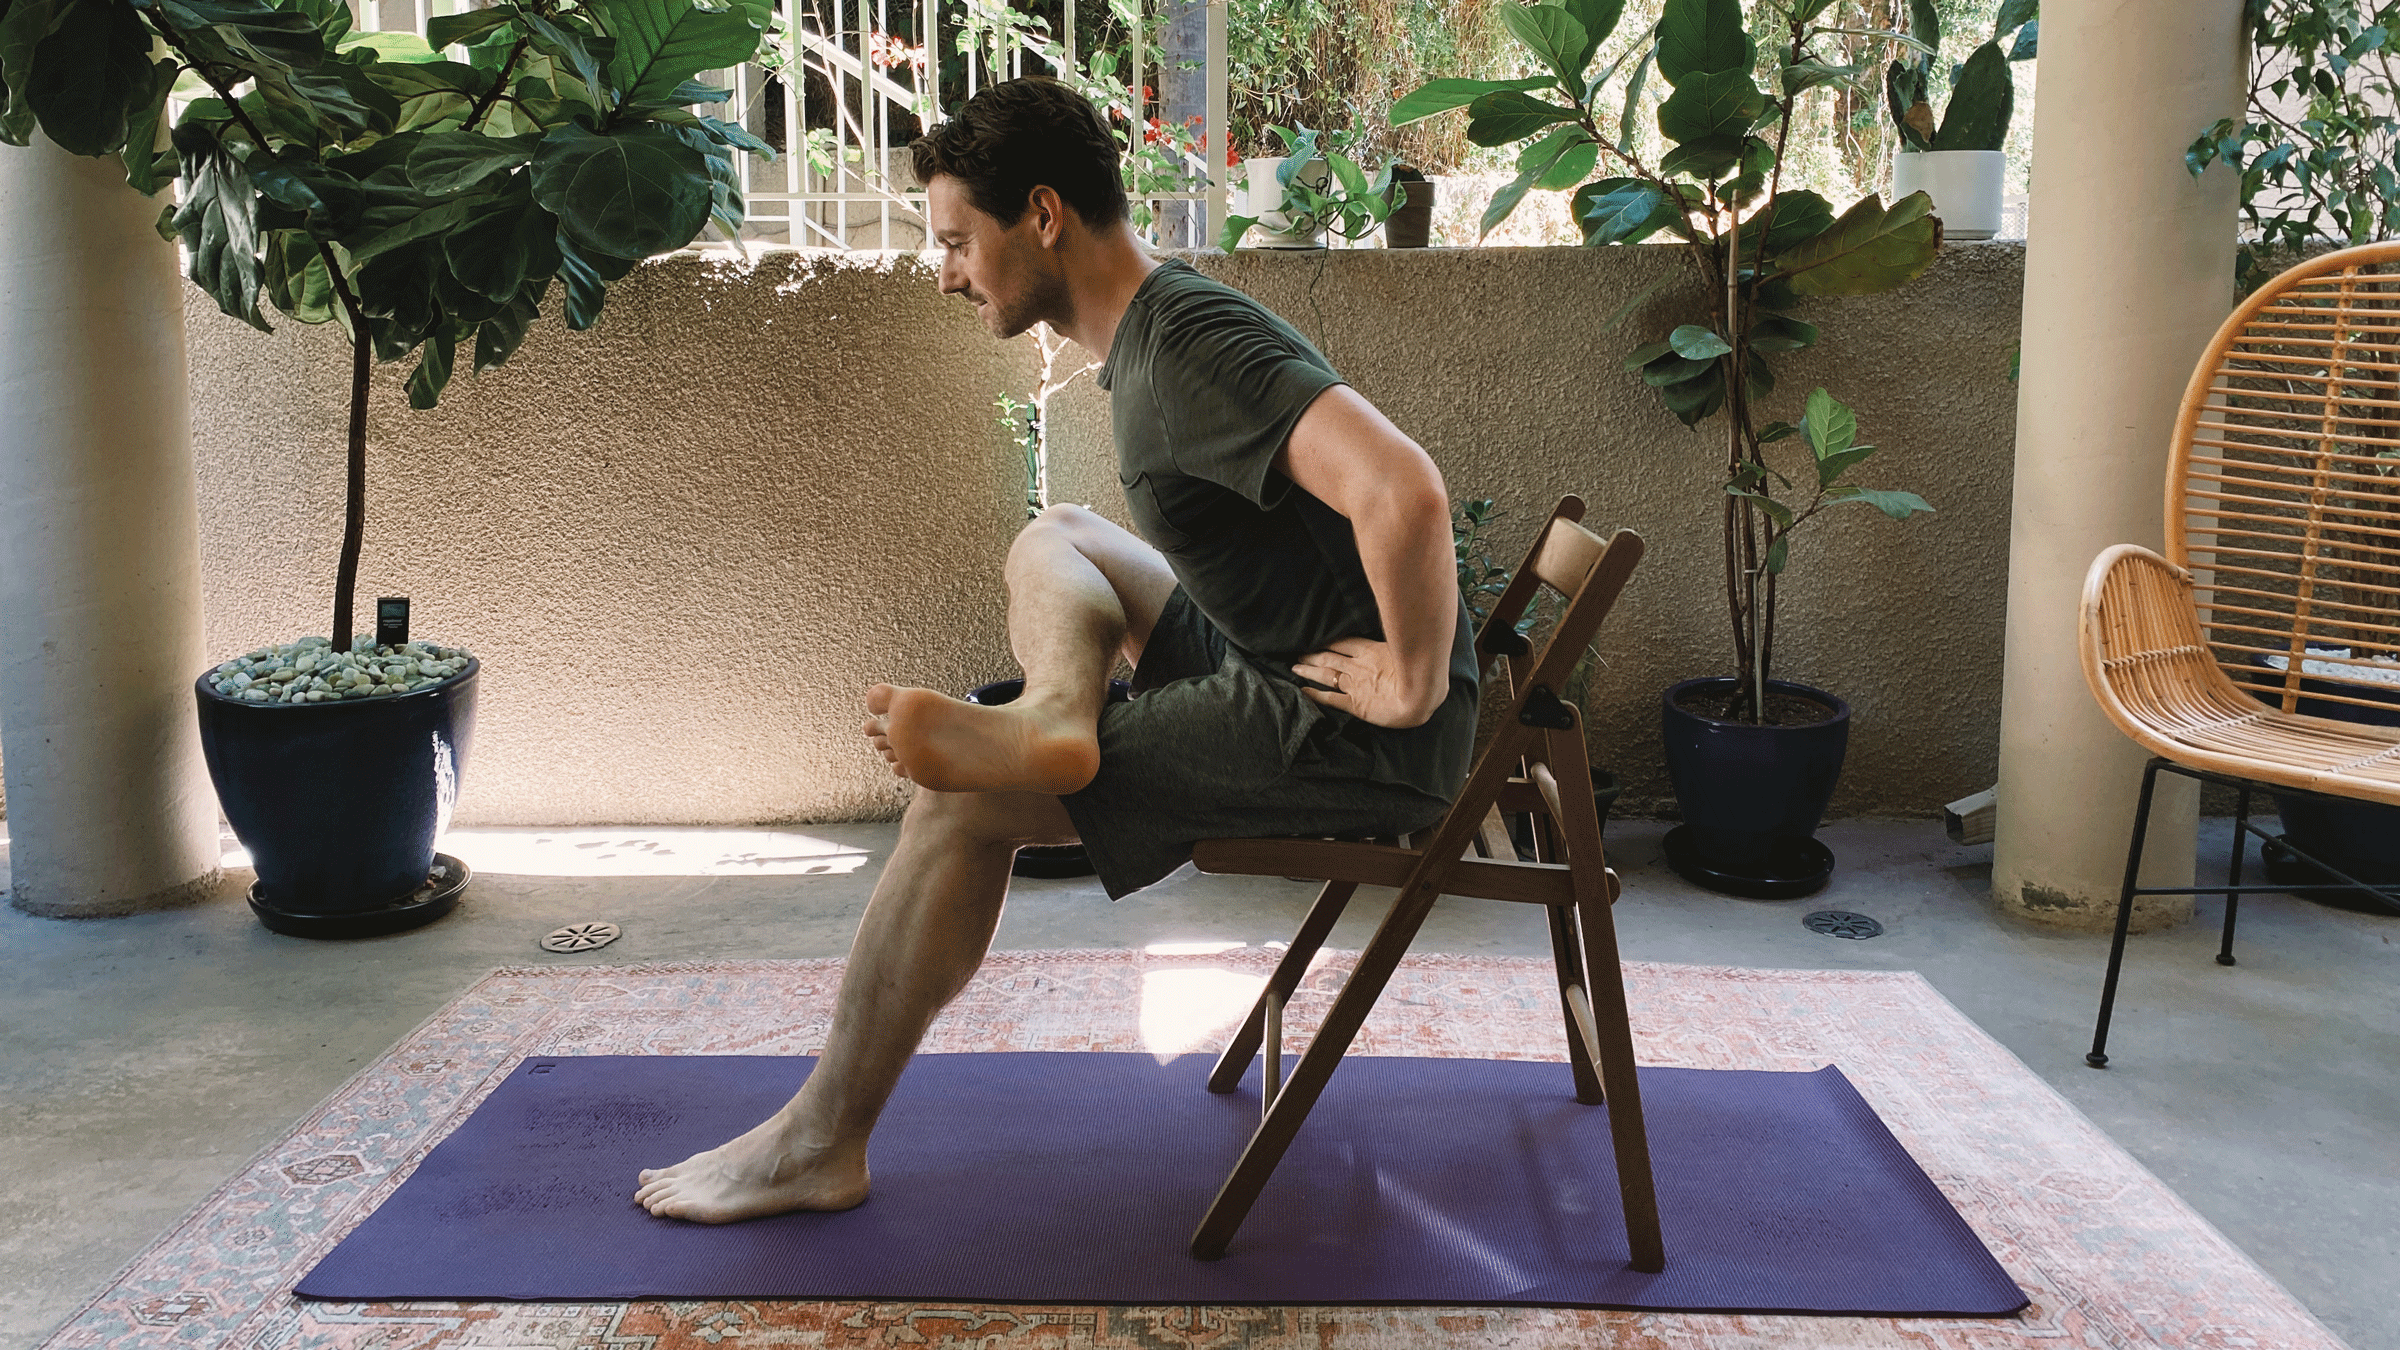 The 10 Best Chair Yoga Poses | livestrong